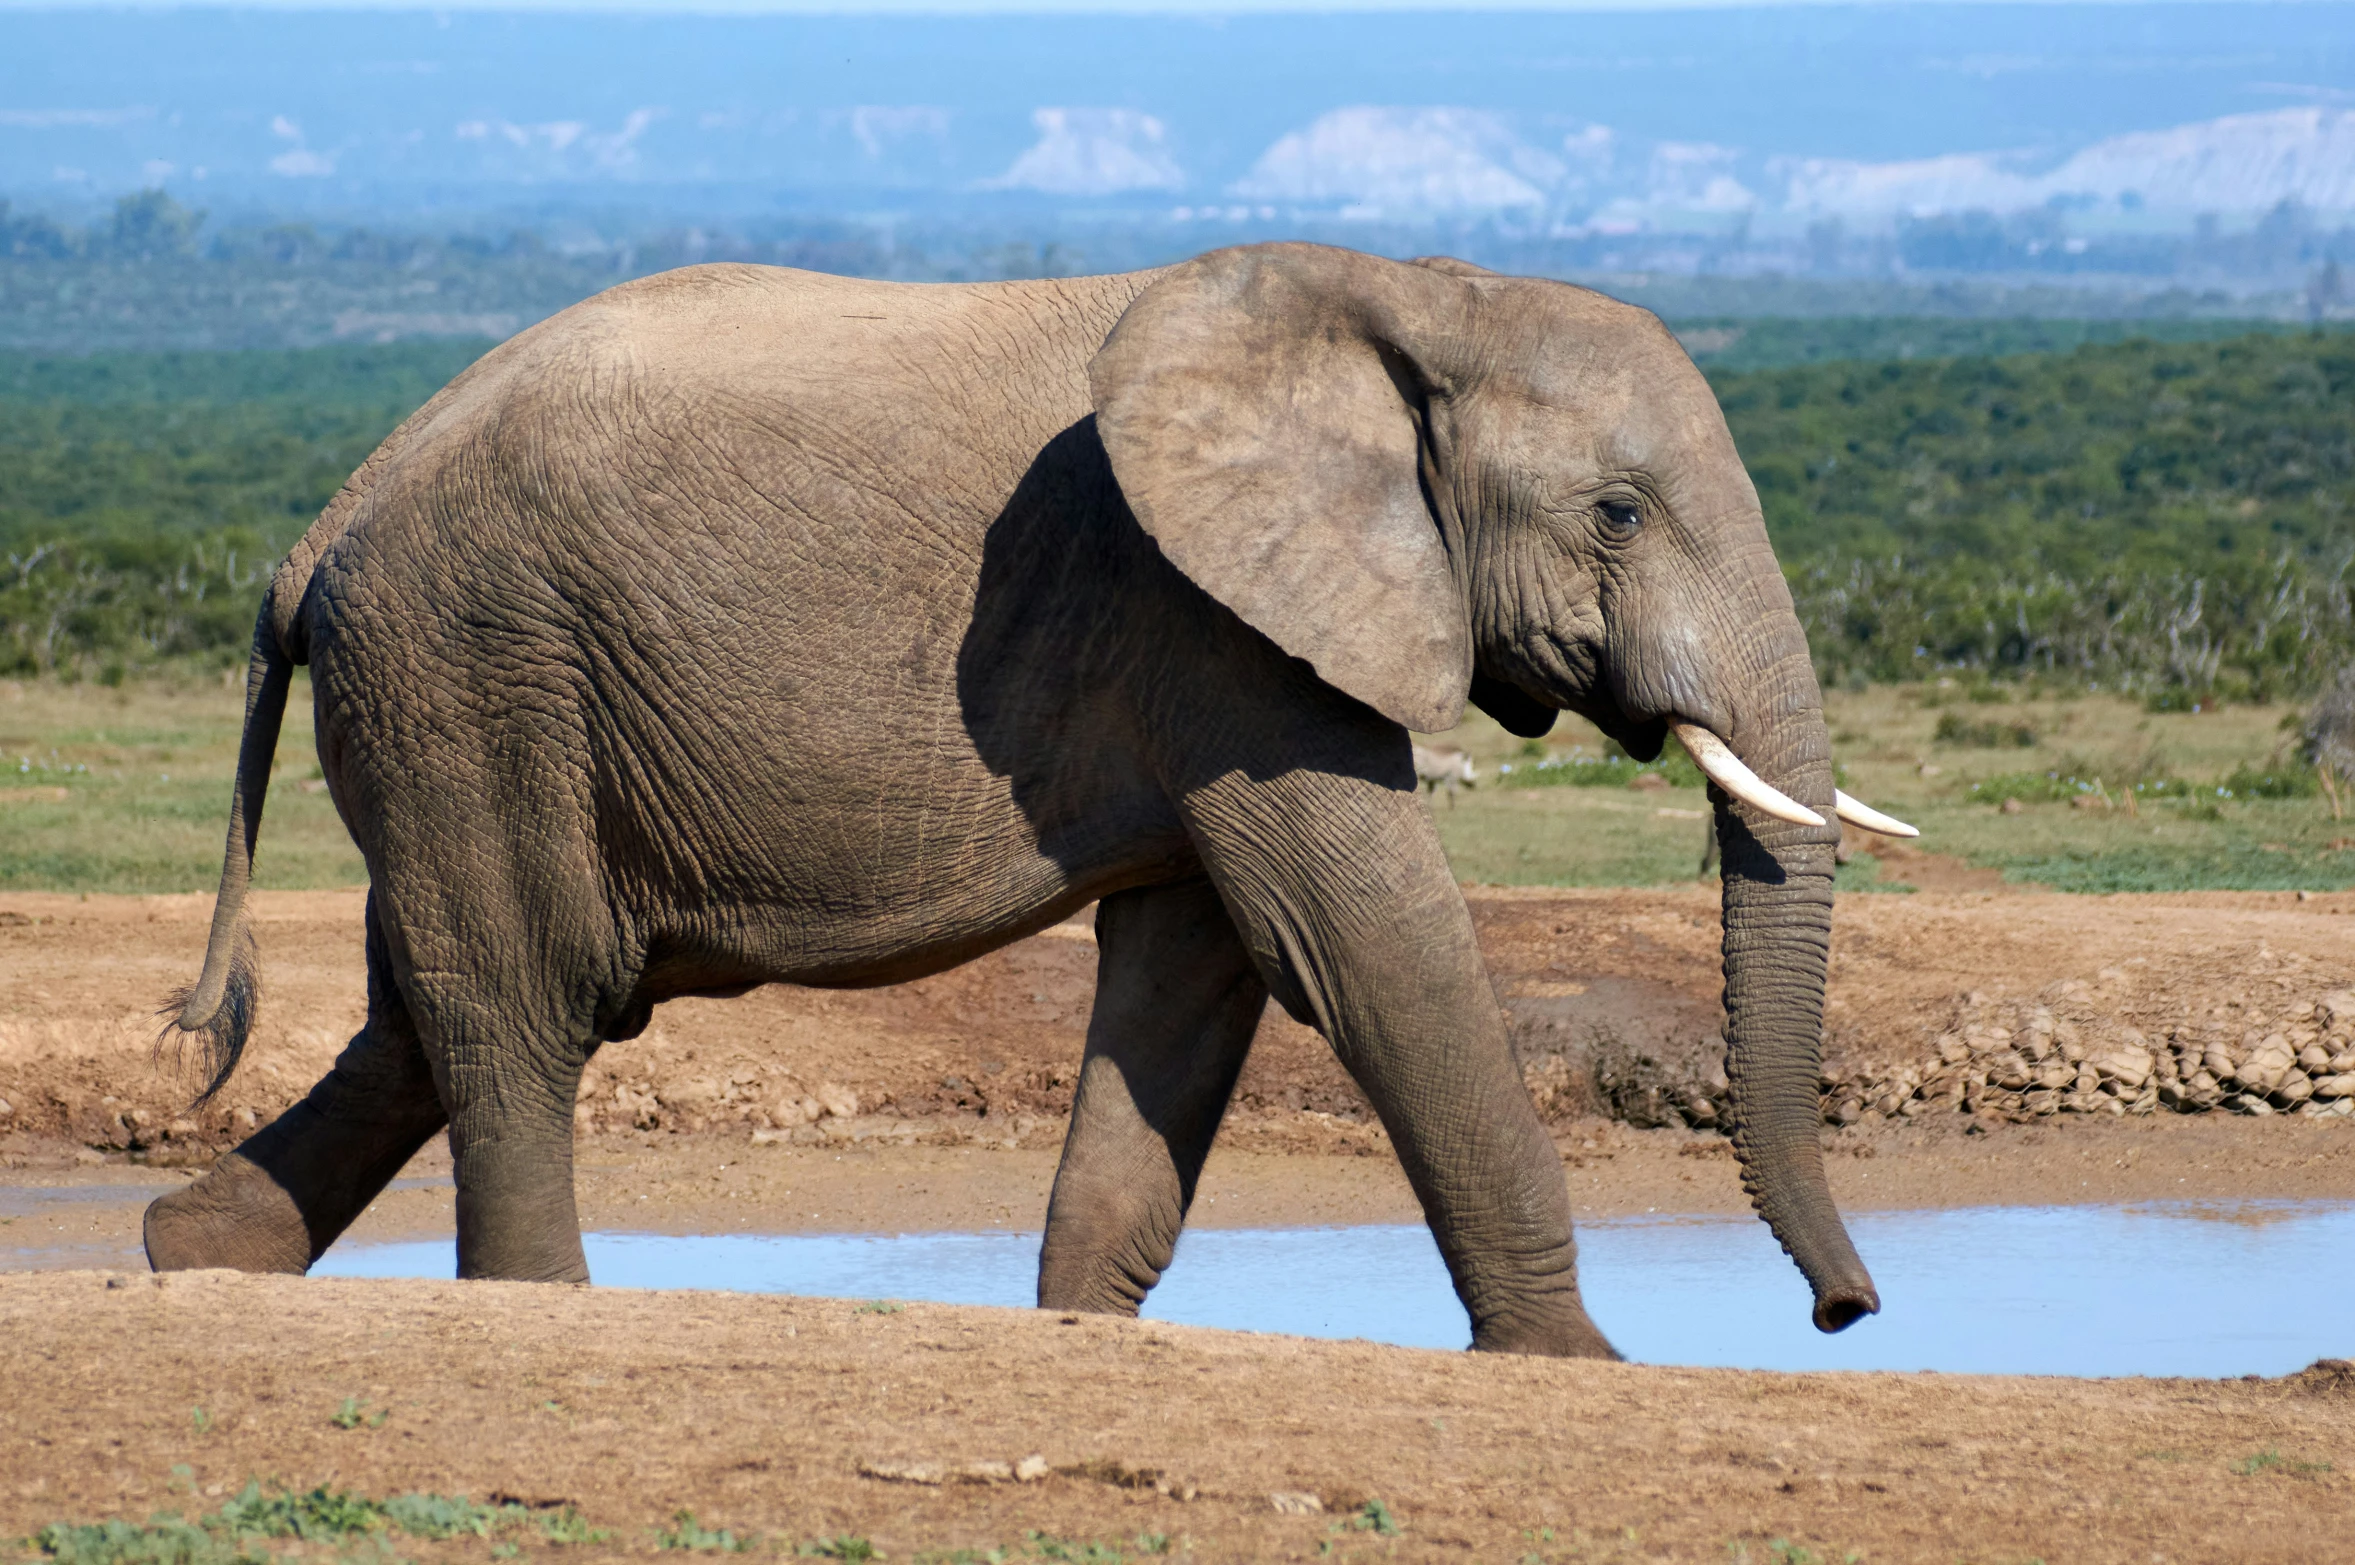 an elephant walking in the dirt and drinking water